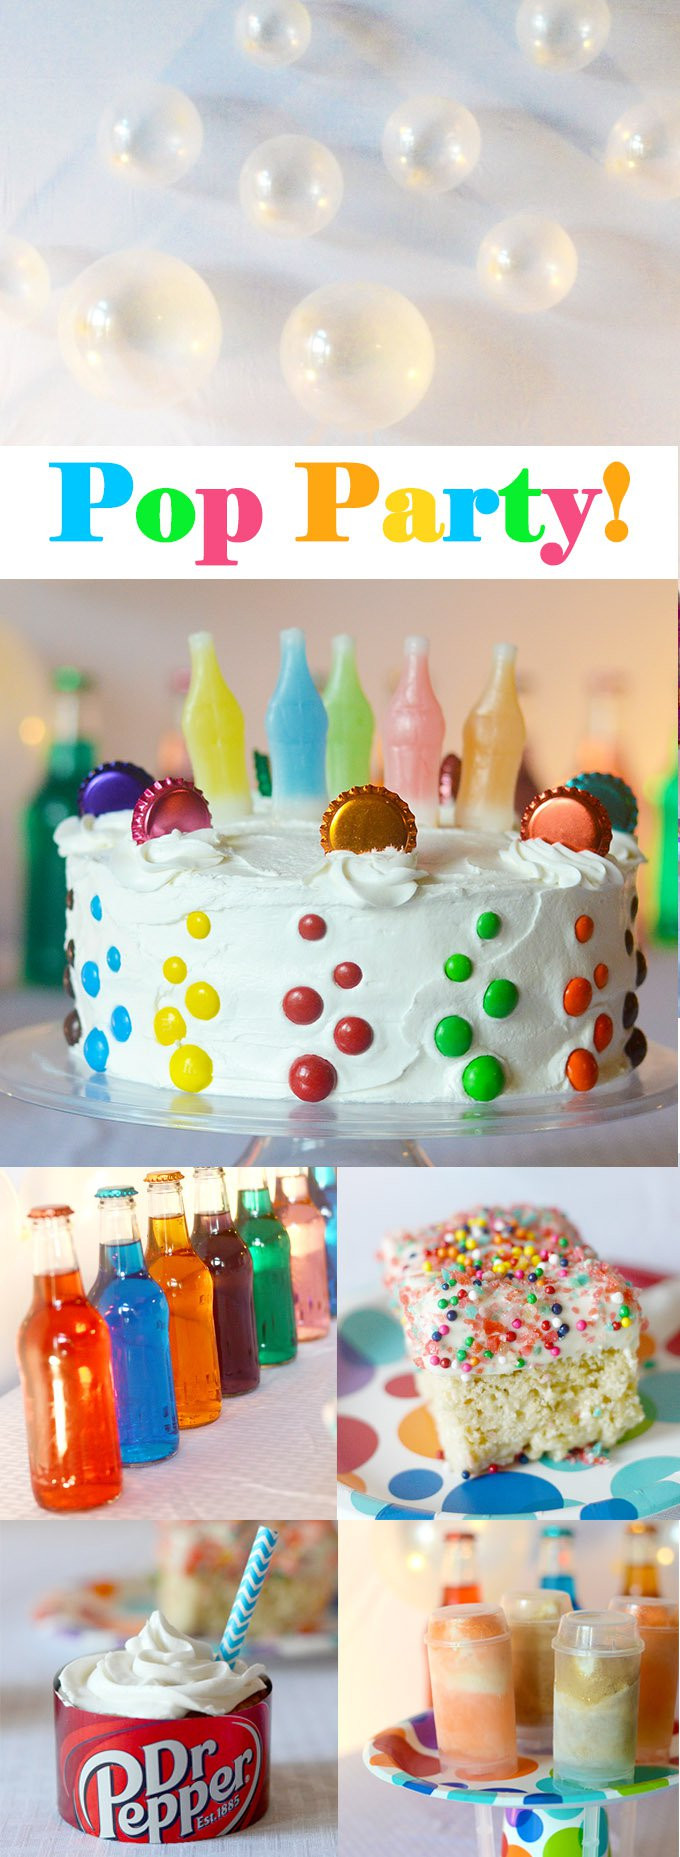 Boy Girl Birthday Party Ideas
 13 Awesome Girl and Boy Birthday Party Themes